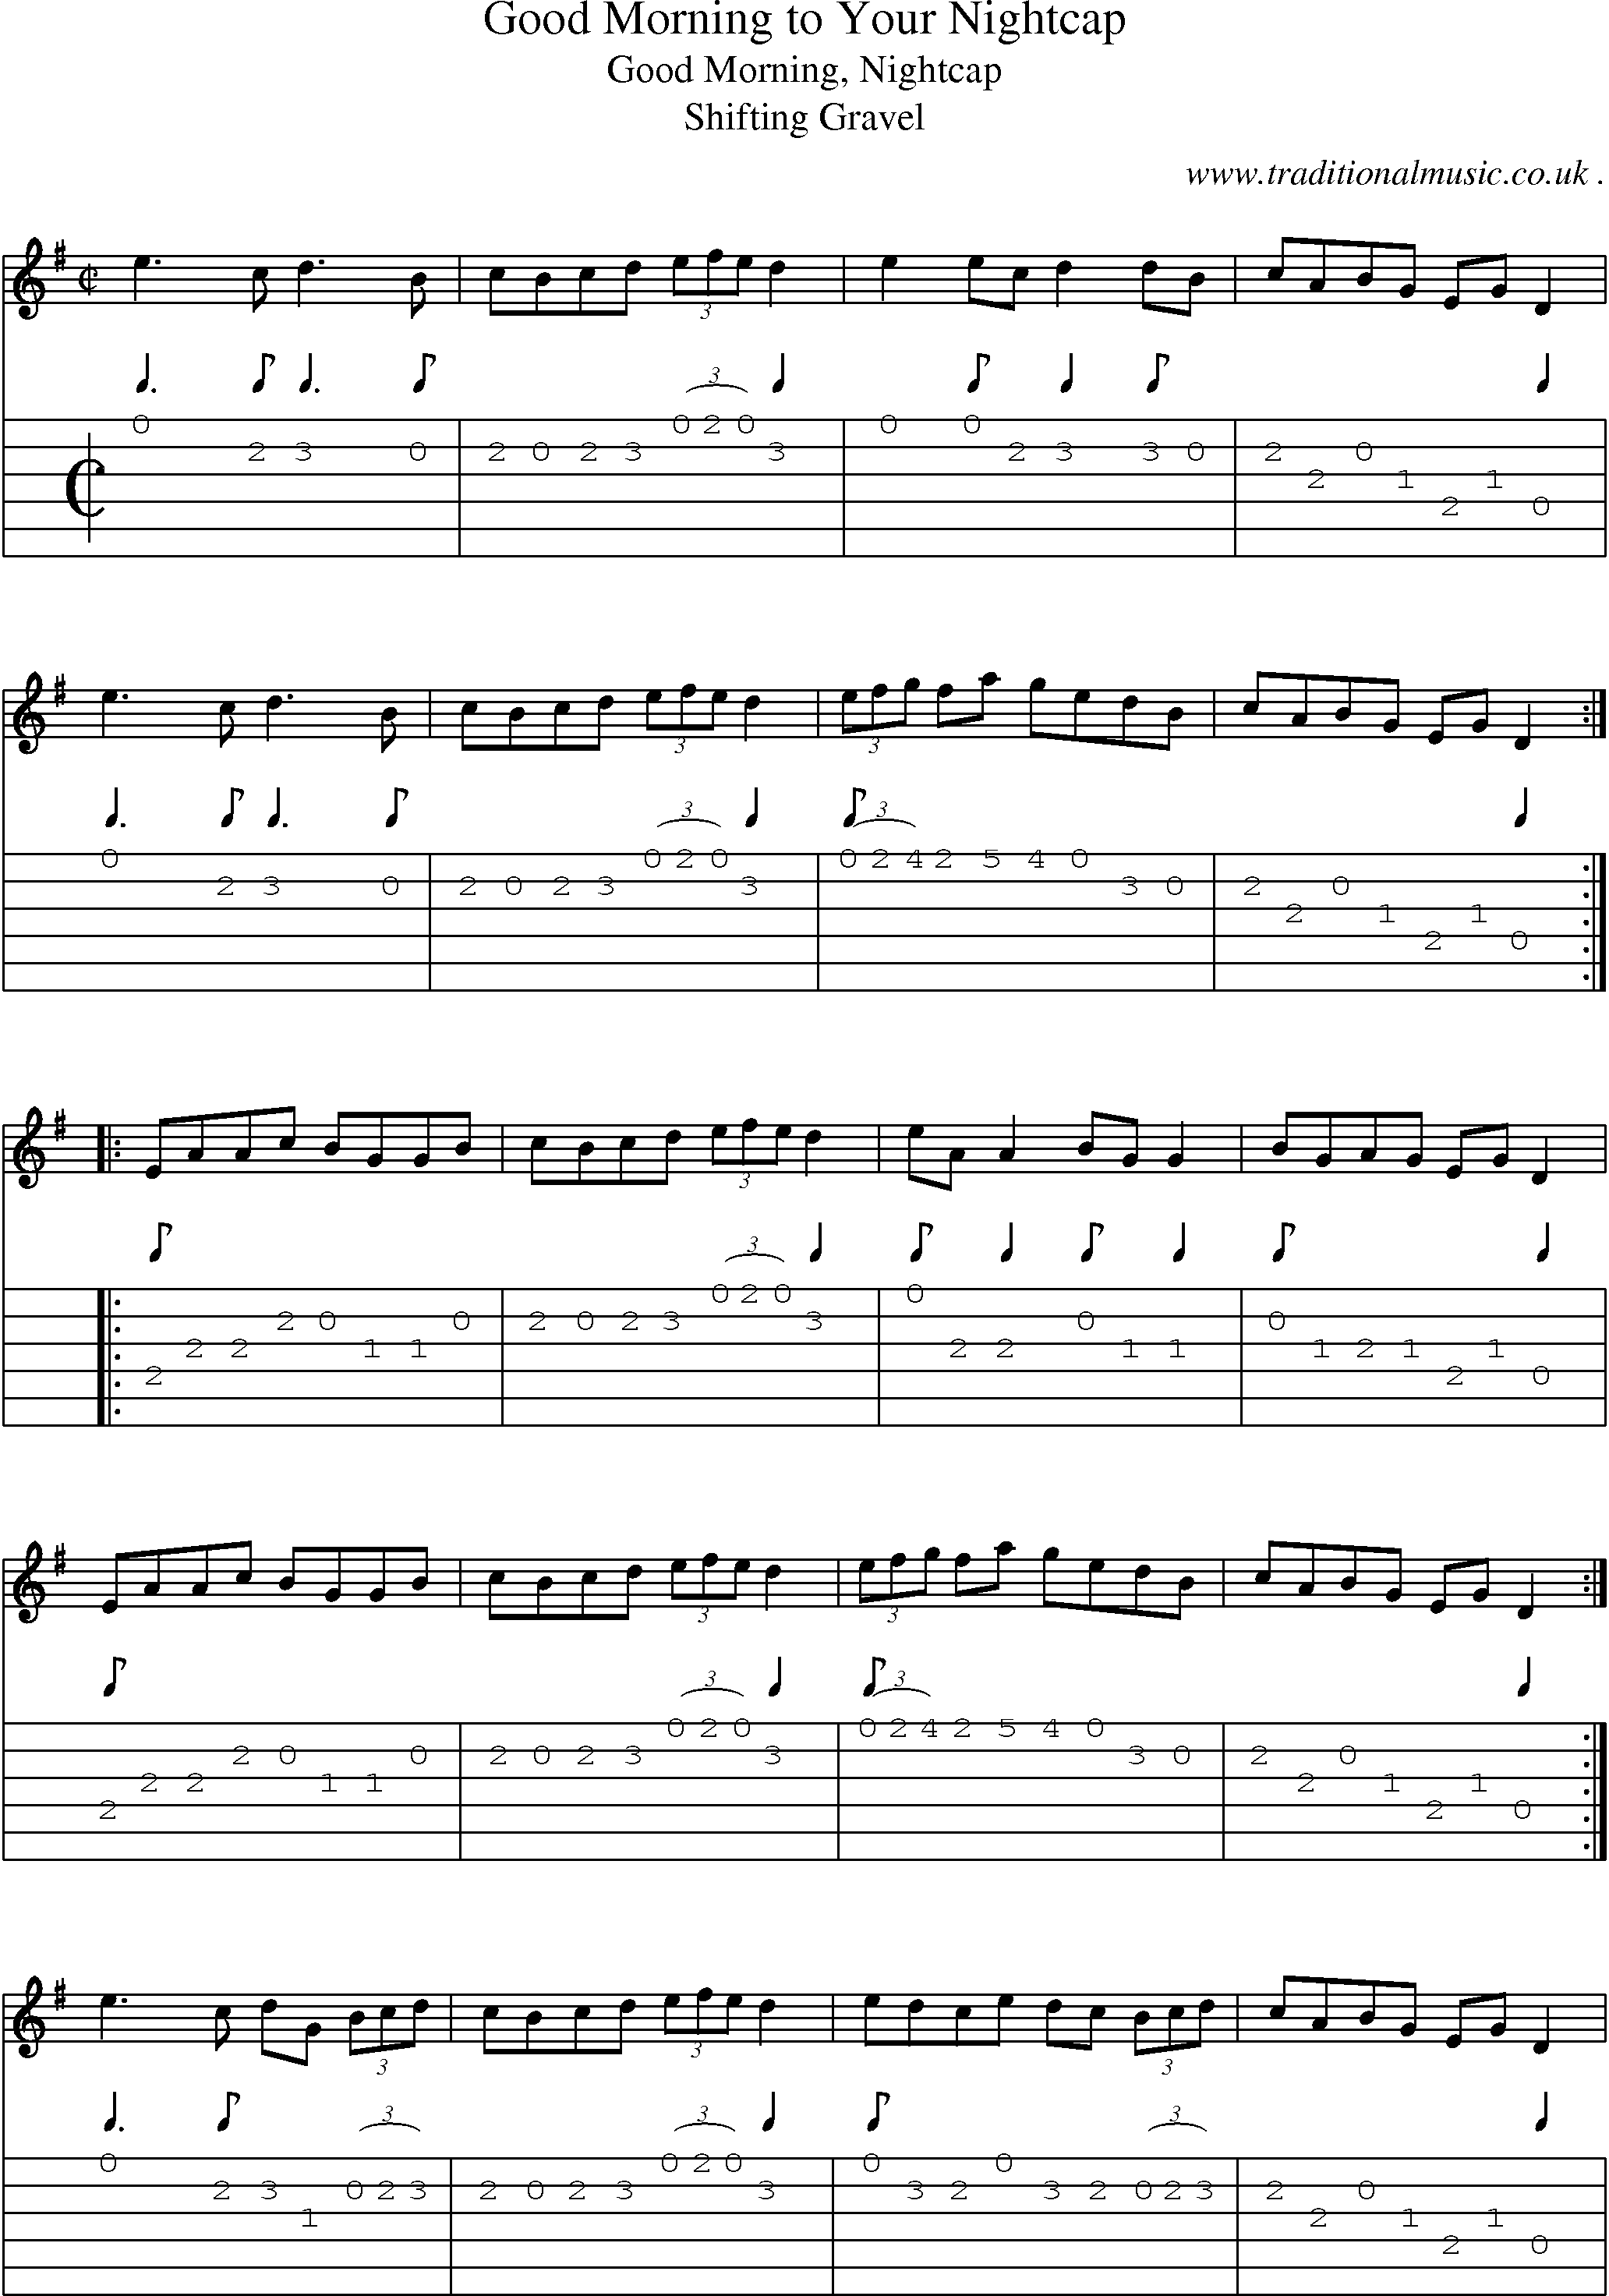 Sheet-Music and Guitar Tabs for Good Morning To Your Nightcap